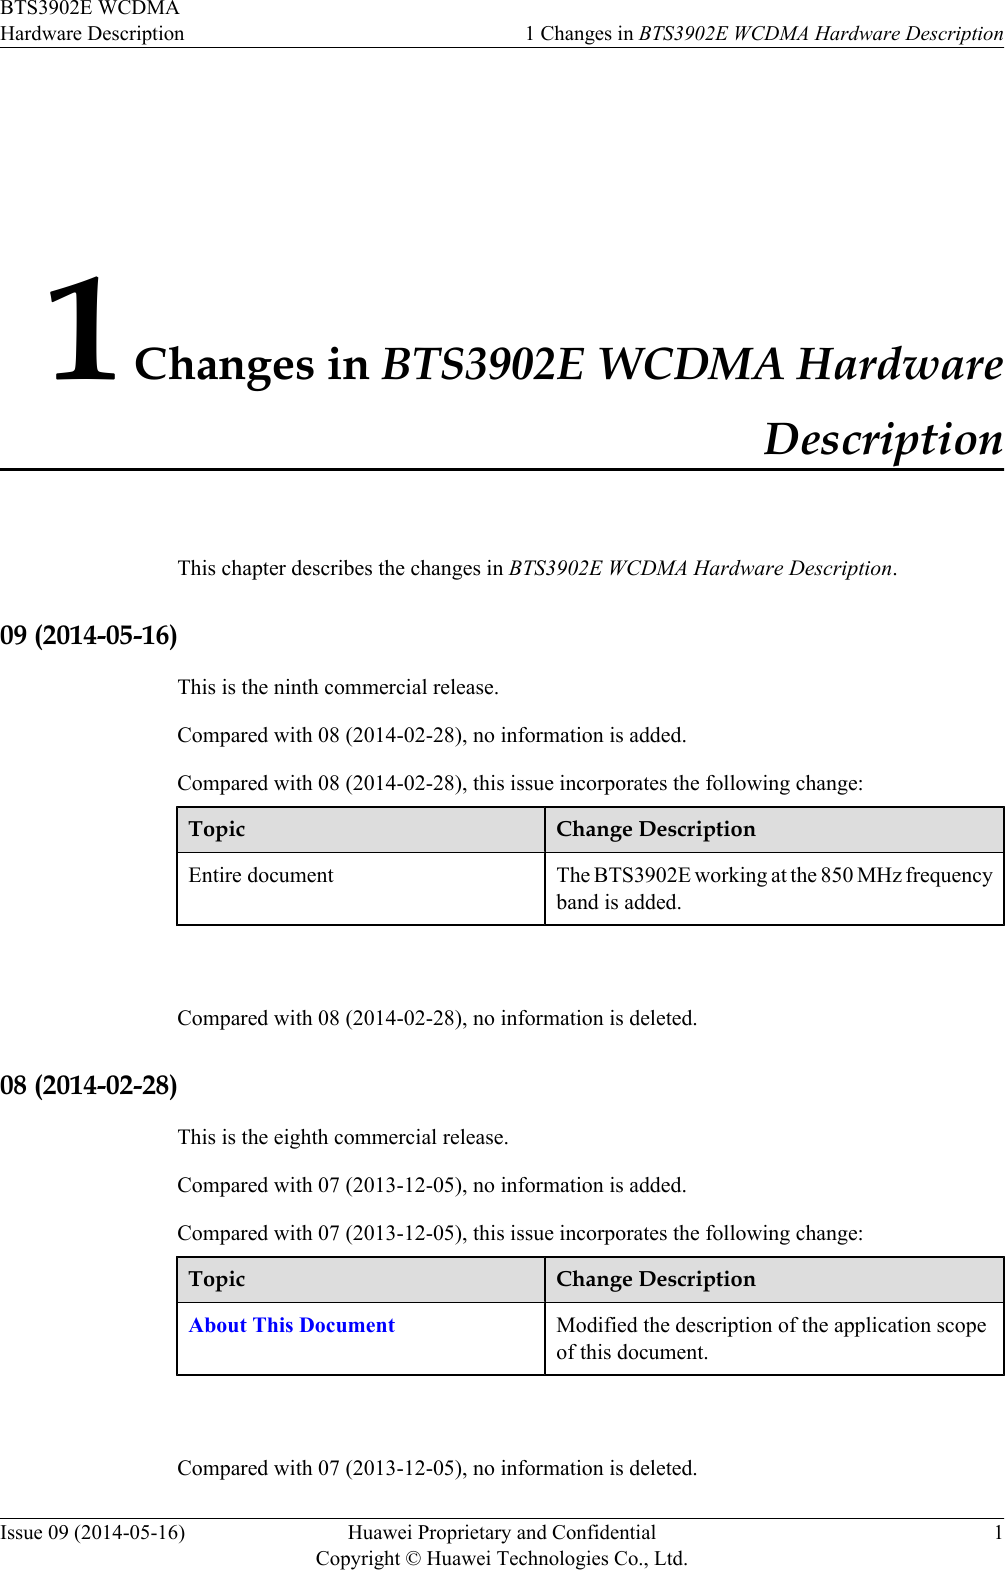 1 Changes in BTS3902E WCDMA HardwareDescriptionThis chapter describes the changes in BTS3902E WCDMA Hardware Description.09 (2014-05-16)This is the ninth commercial release.Compared with 08 (2014-02-28), no information is added.Compared with 08 (2014-02-28), this issue incorporates the following change:Topic Change DescriptionEntire document The BTS3902E working at the 850 MHz frequencyband is added. Compared with 08 (2014-02-28), no information is deleted.08 (2014-02-28)This is the eighth commercial release.Compared with 07 (2013-12-05), no information is added.Compared with 07 (2013-12-05), this issue incorporates the following change:Topic Change DescriptionAbout This Document Modified the description of the application scopeof this document. Compared with 07 (2013-12-05), no information is deleted.BTS3902E WCDMAHardware Description 1 Changes in BTS3902E WCDMA Hardware DescriptionIssue 09 (2014-05-16) Huawei Proprietary and ConfidentialCopyright © Huawei Technologies Co., Ltd.1